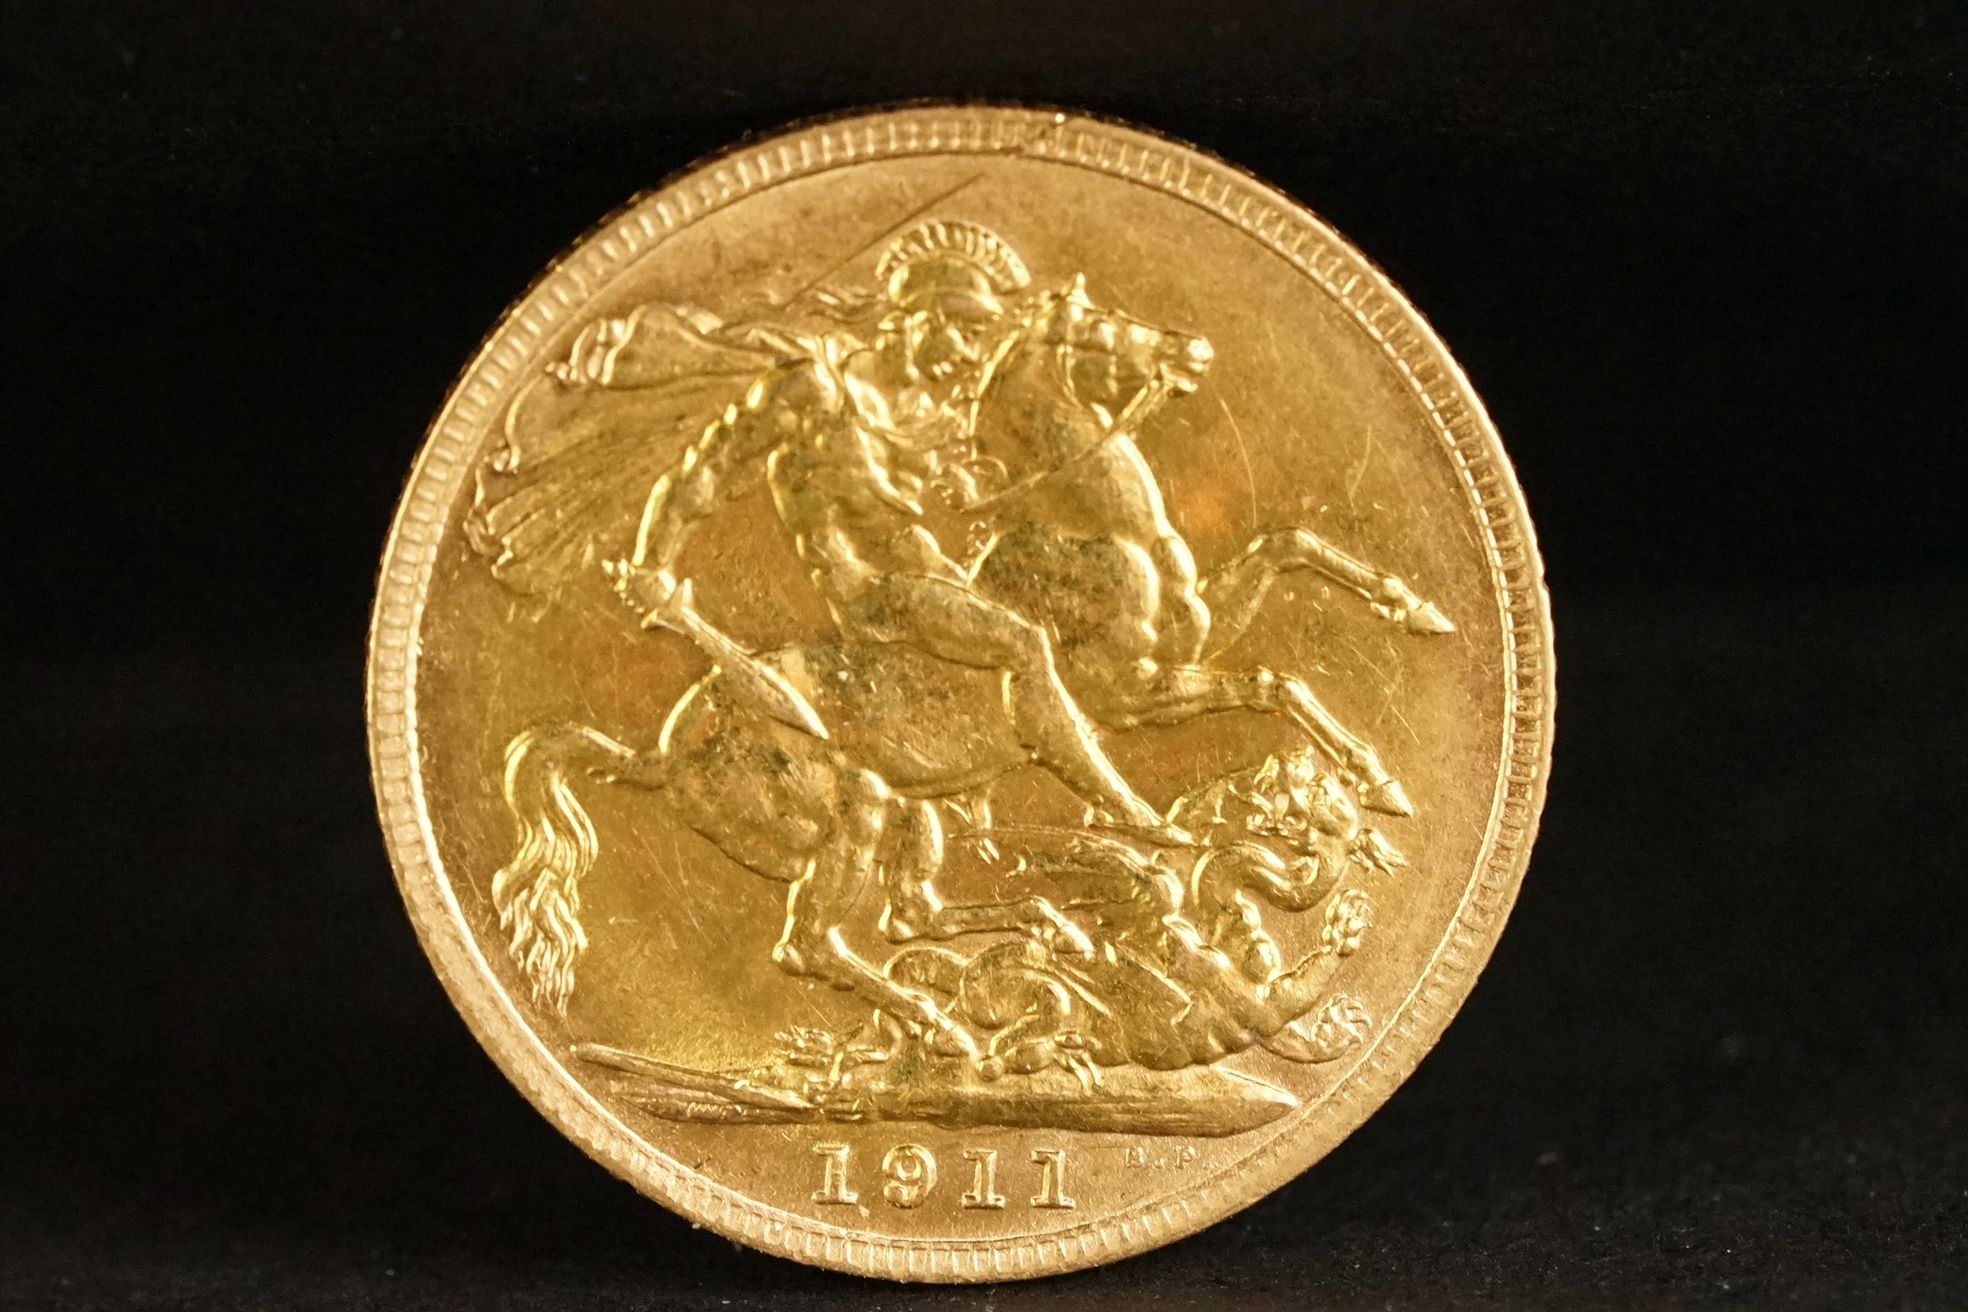 A United Kingdom King George V gold full sovereign coin dated 1911.